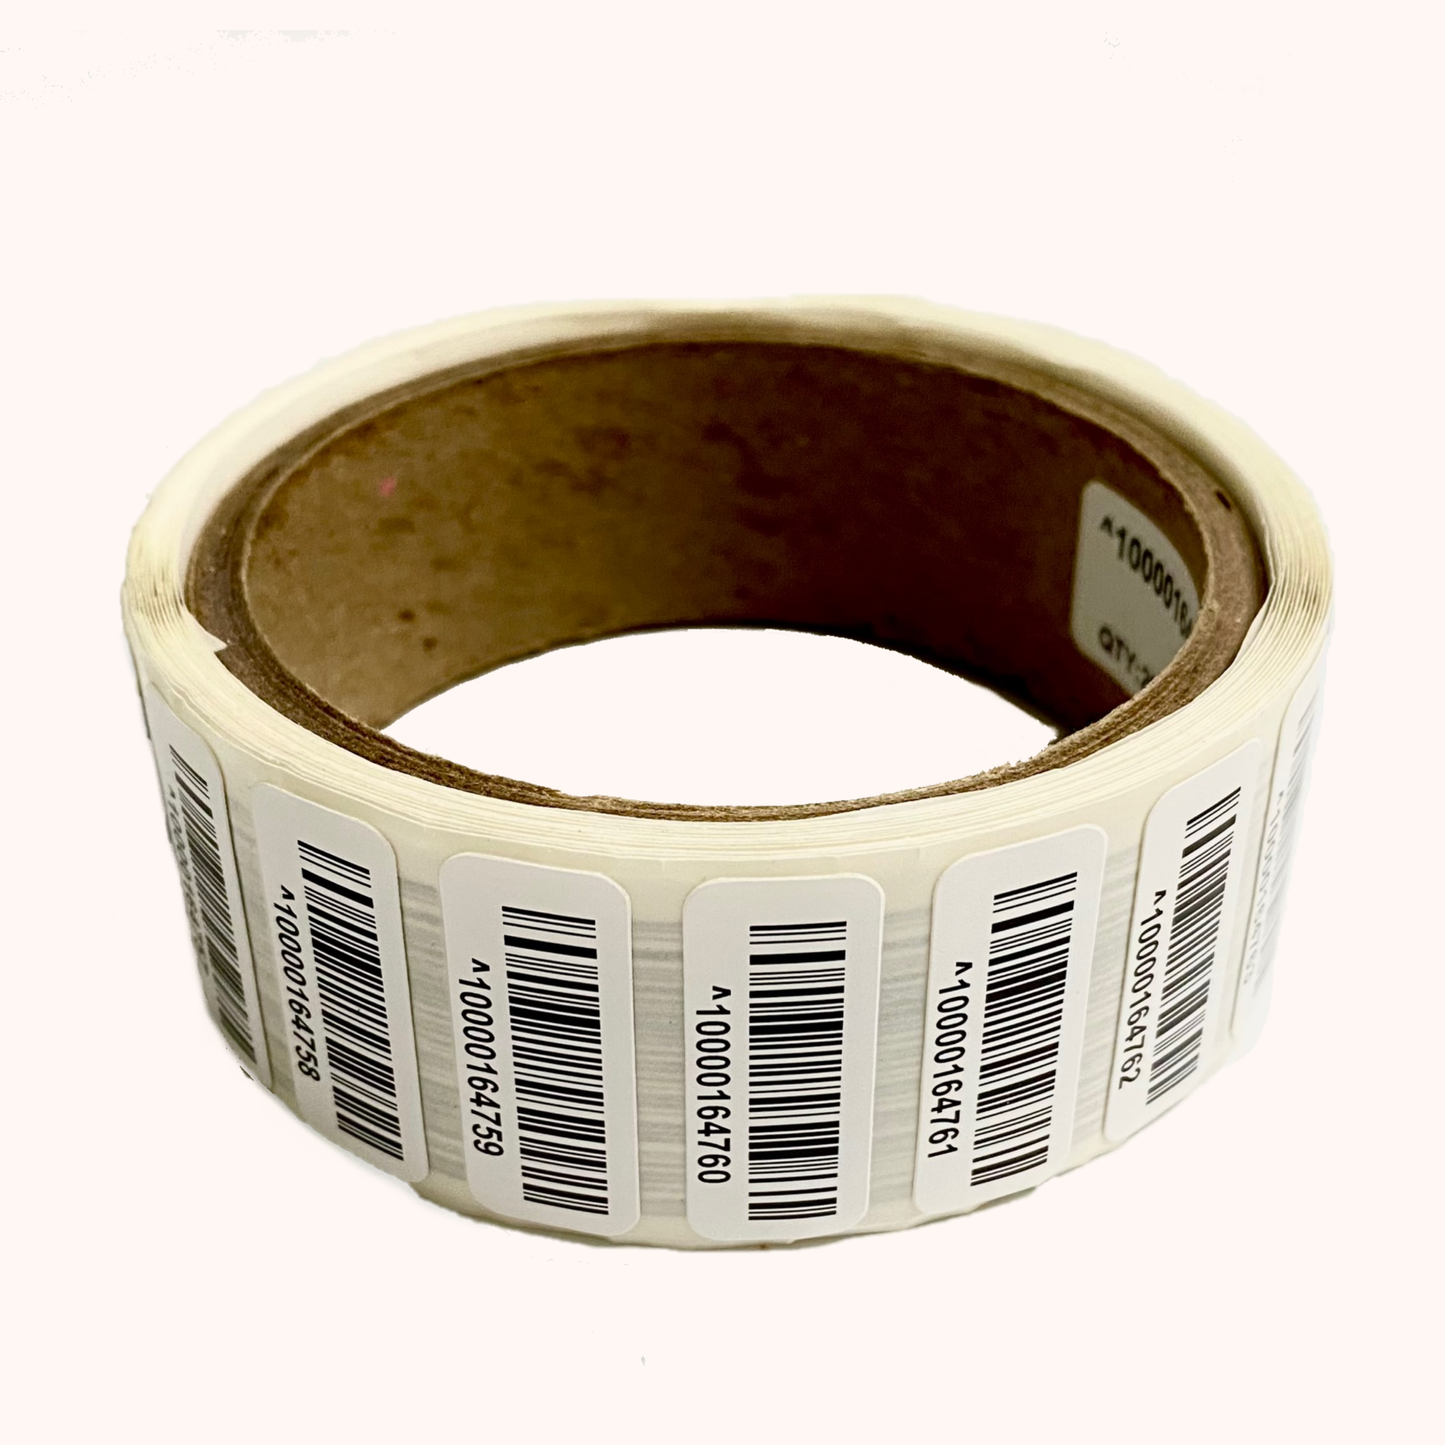 Reassignable Barcodes - Bag Tag Barcodes in Roll of 250